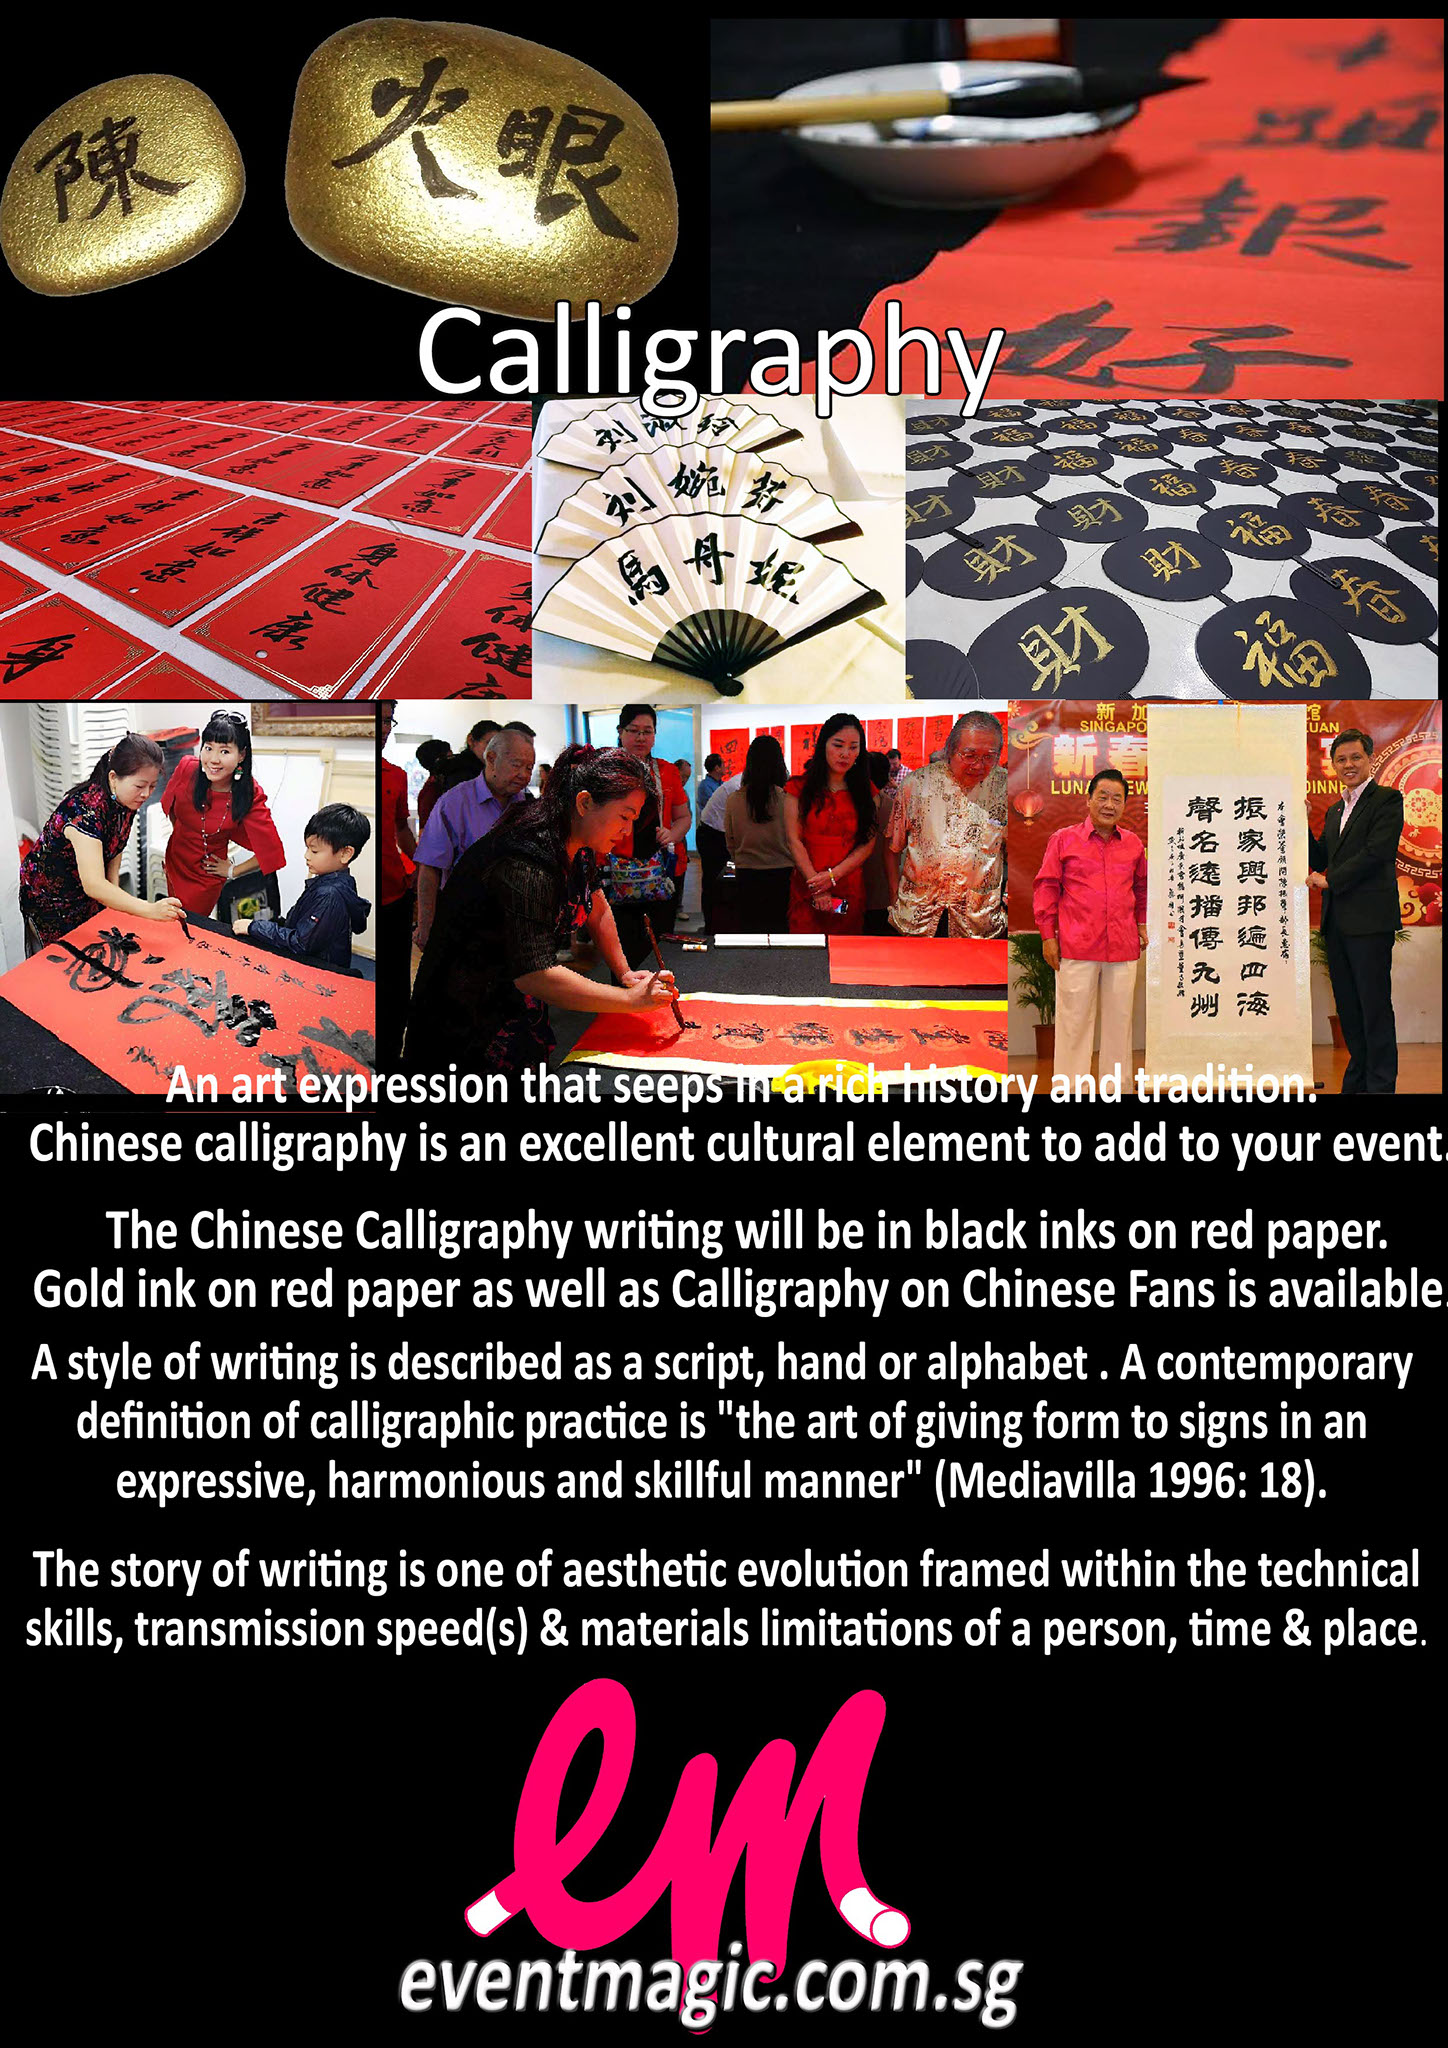 Calligraphy for hire Singapore, Singapore Calligraphy Artist for hire Calligraphy Singapore